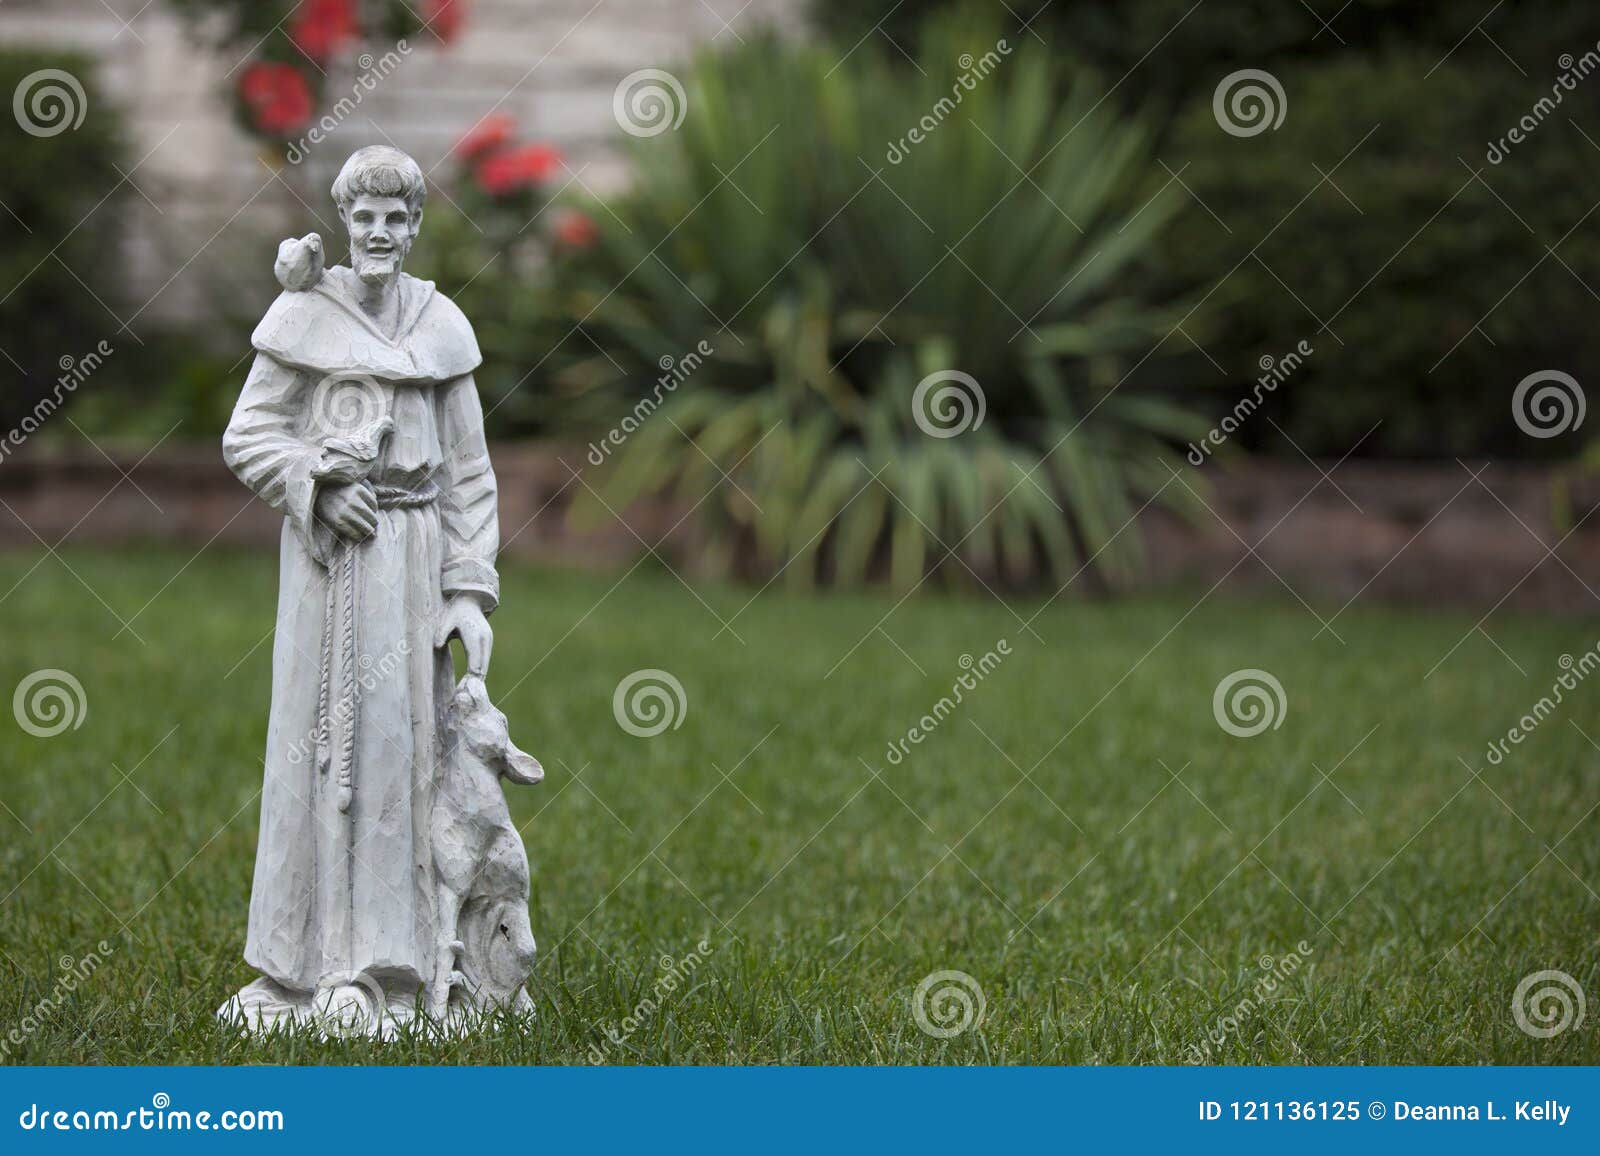 Garden Statue Of St Francis Of Assisi Stock Image Image Of